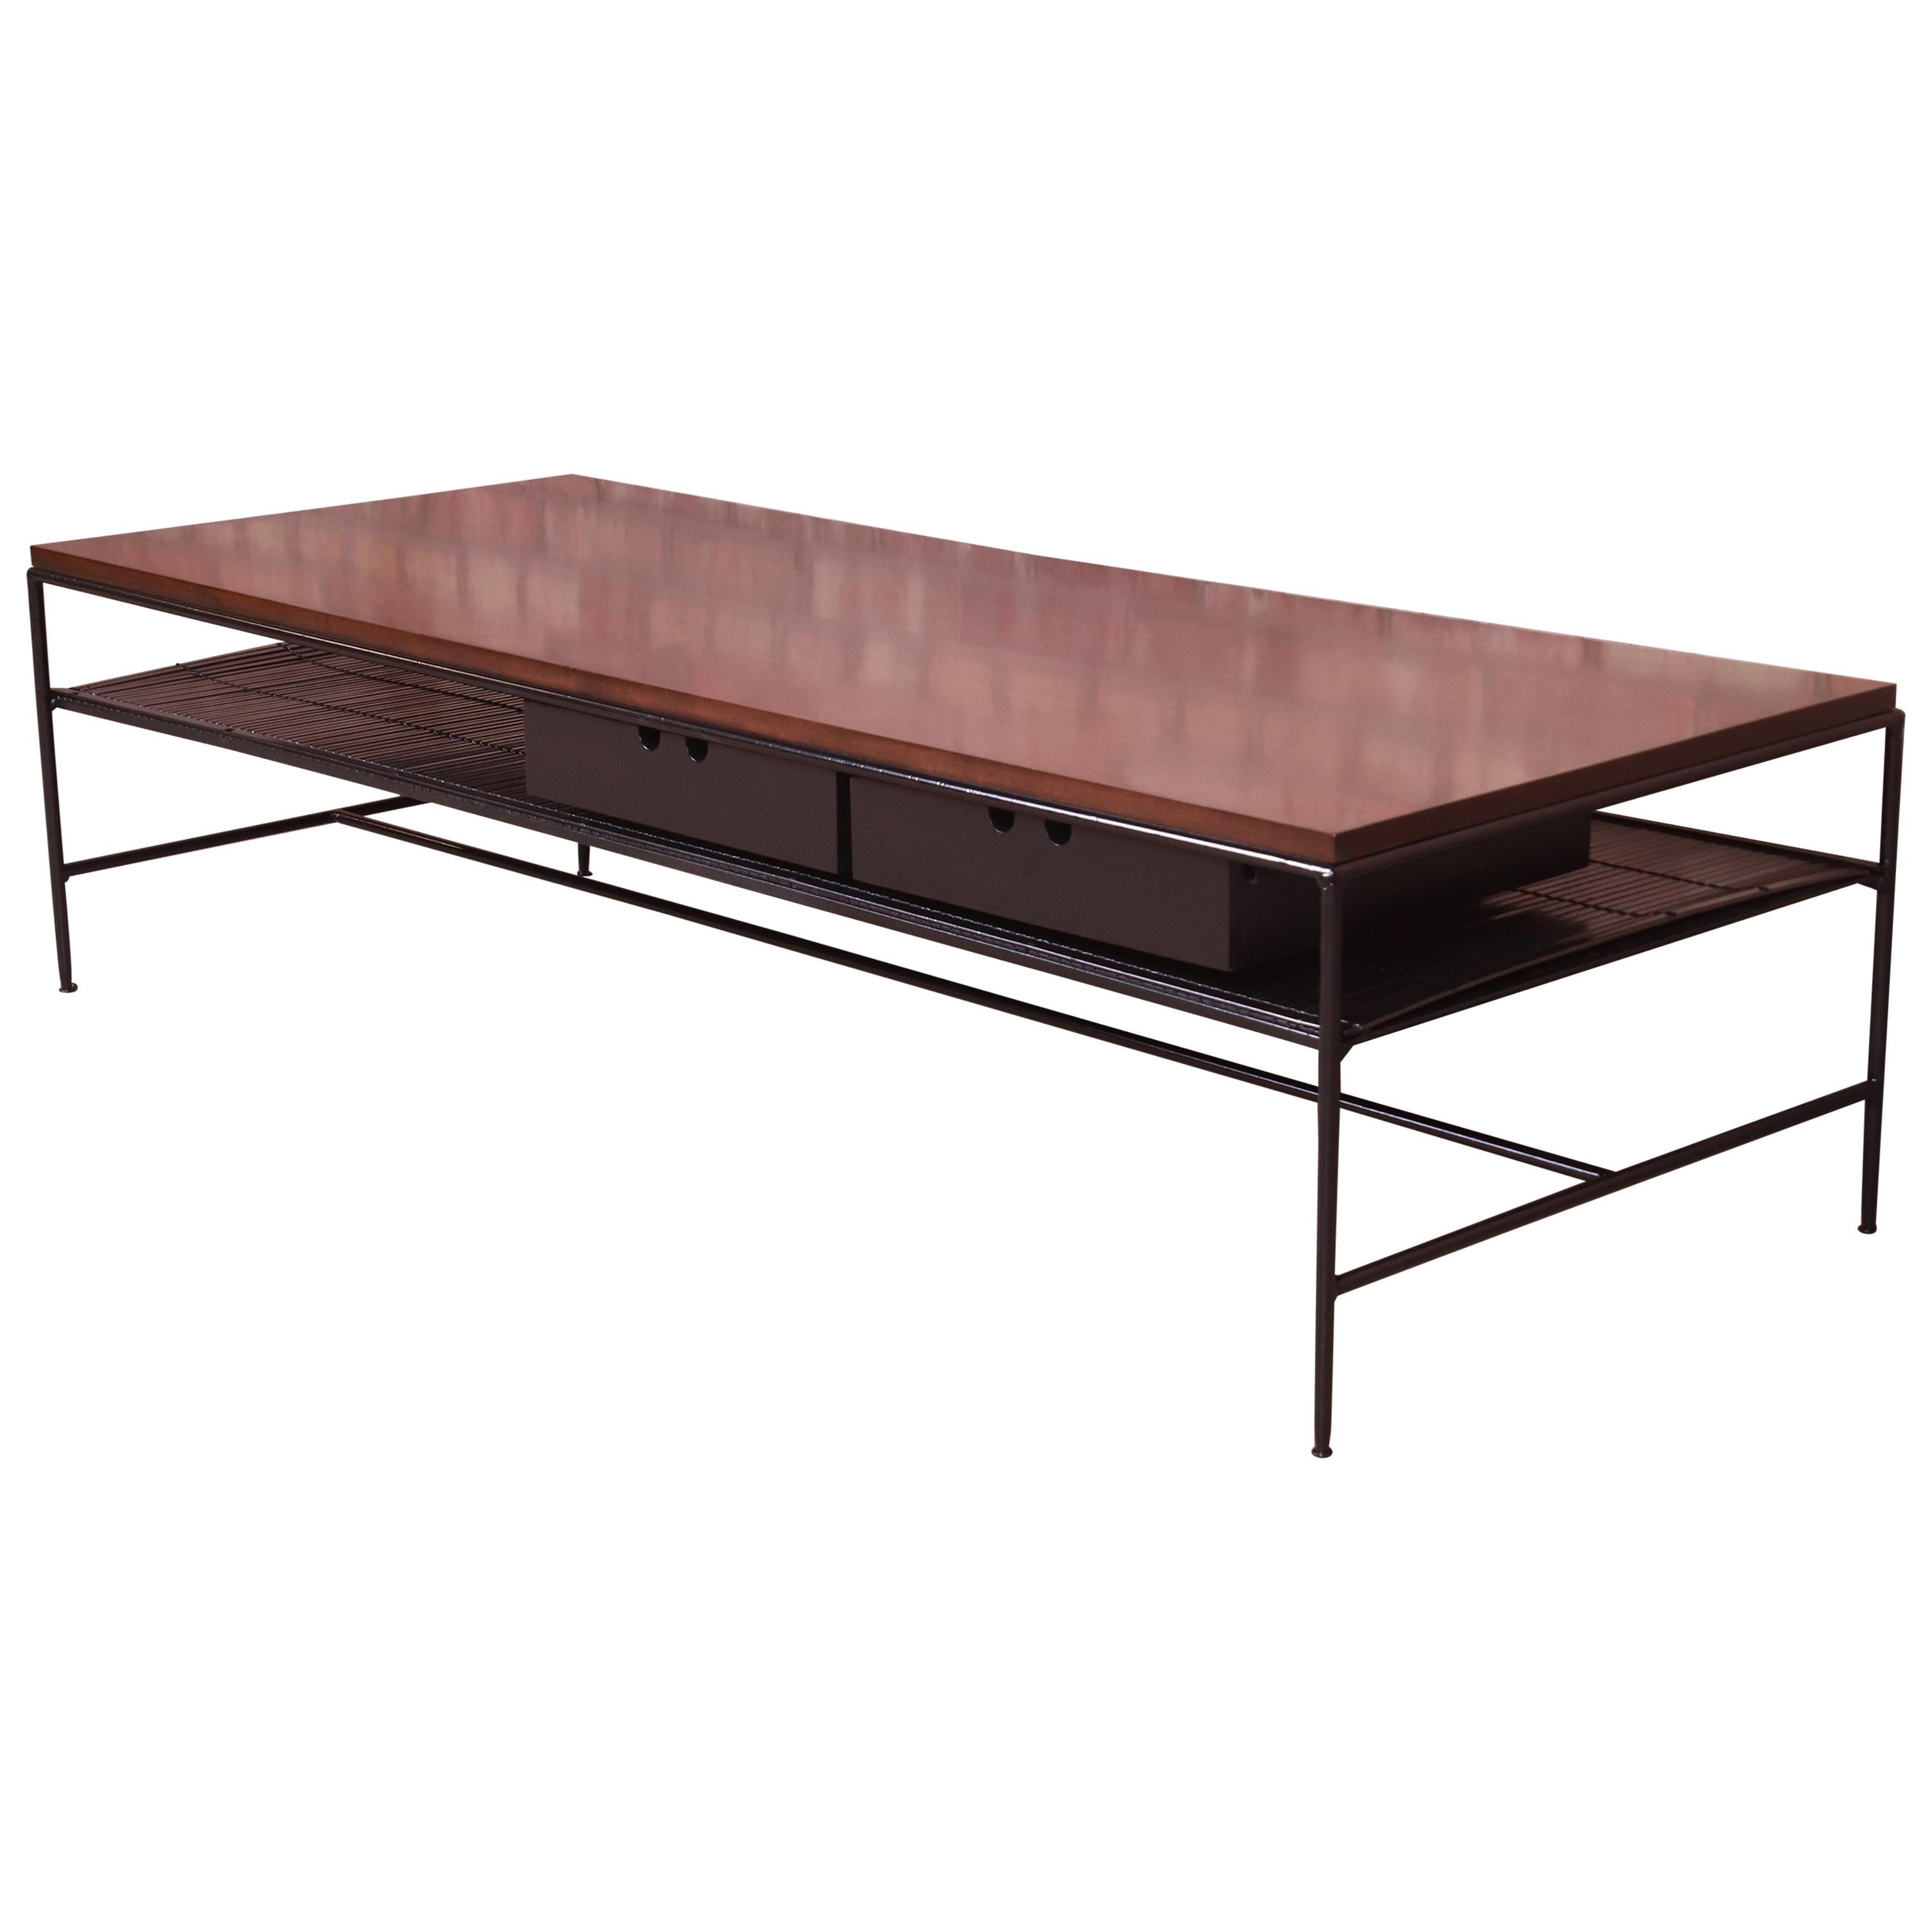 Paul McCobb Planner Group Iron and Maple Coffee Table, Newly Refinished